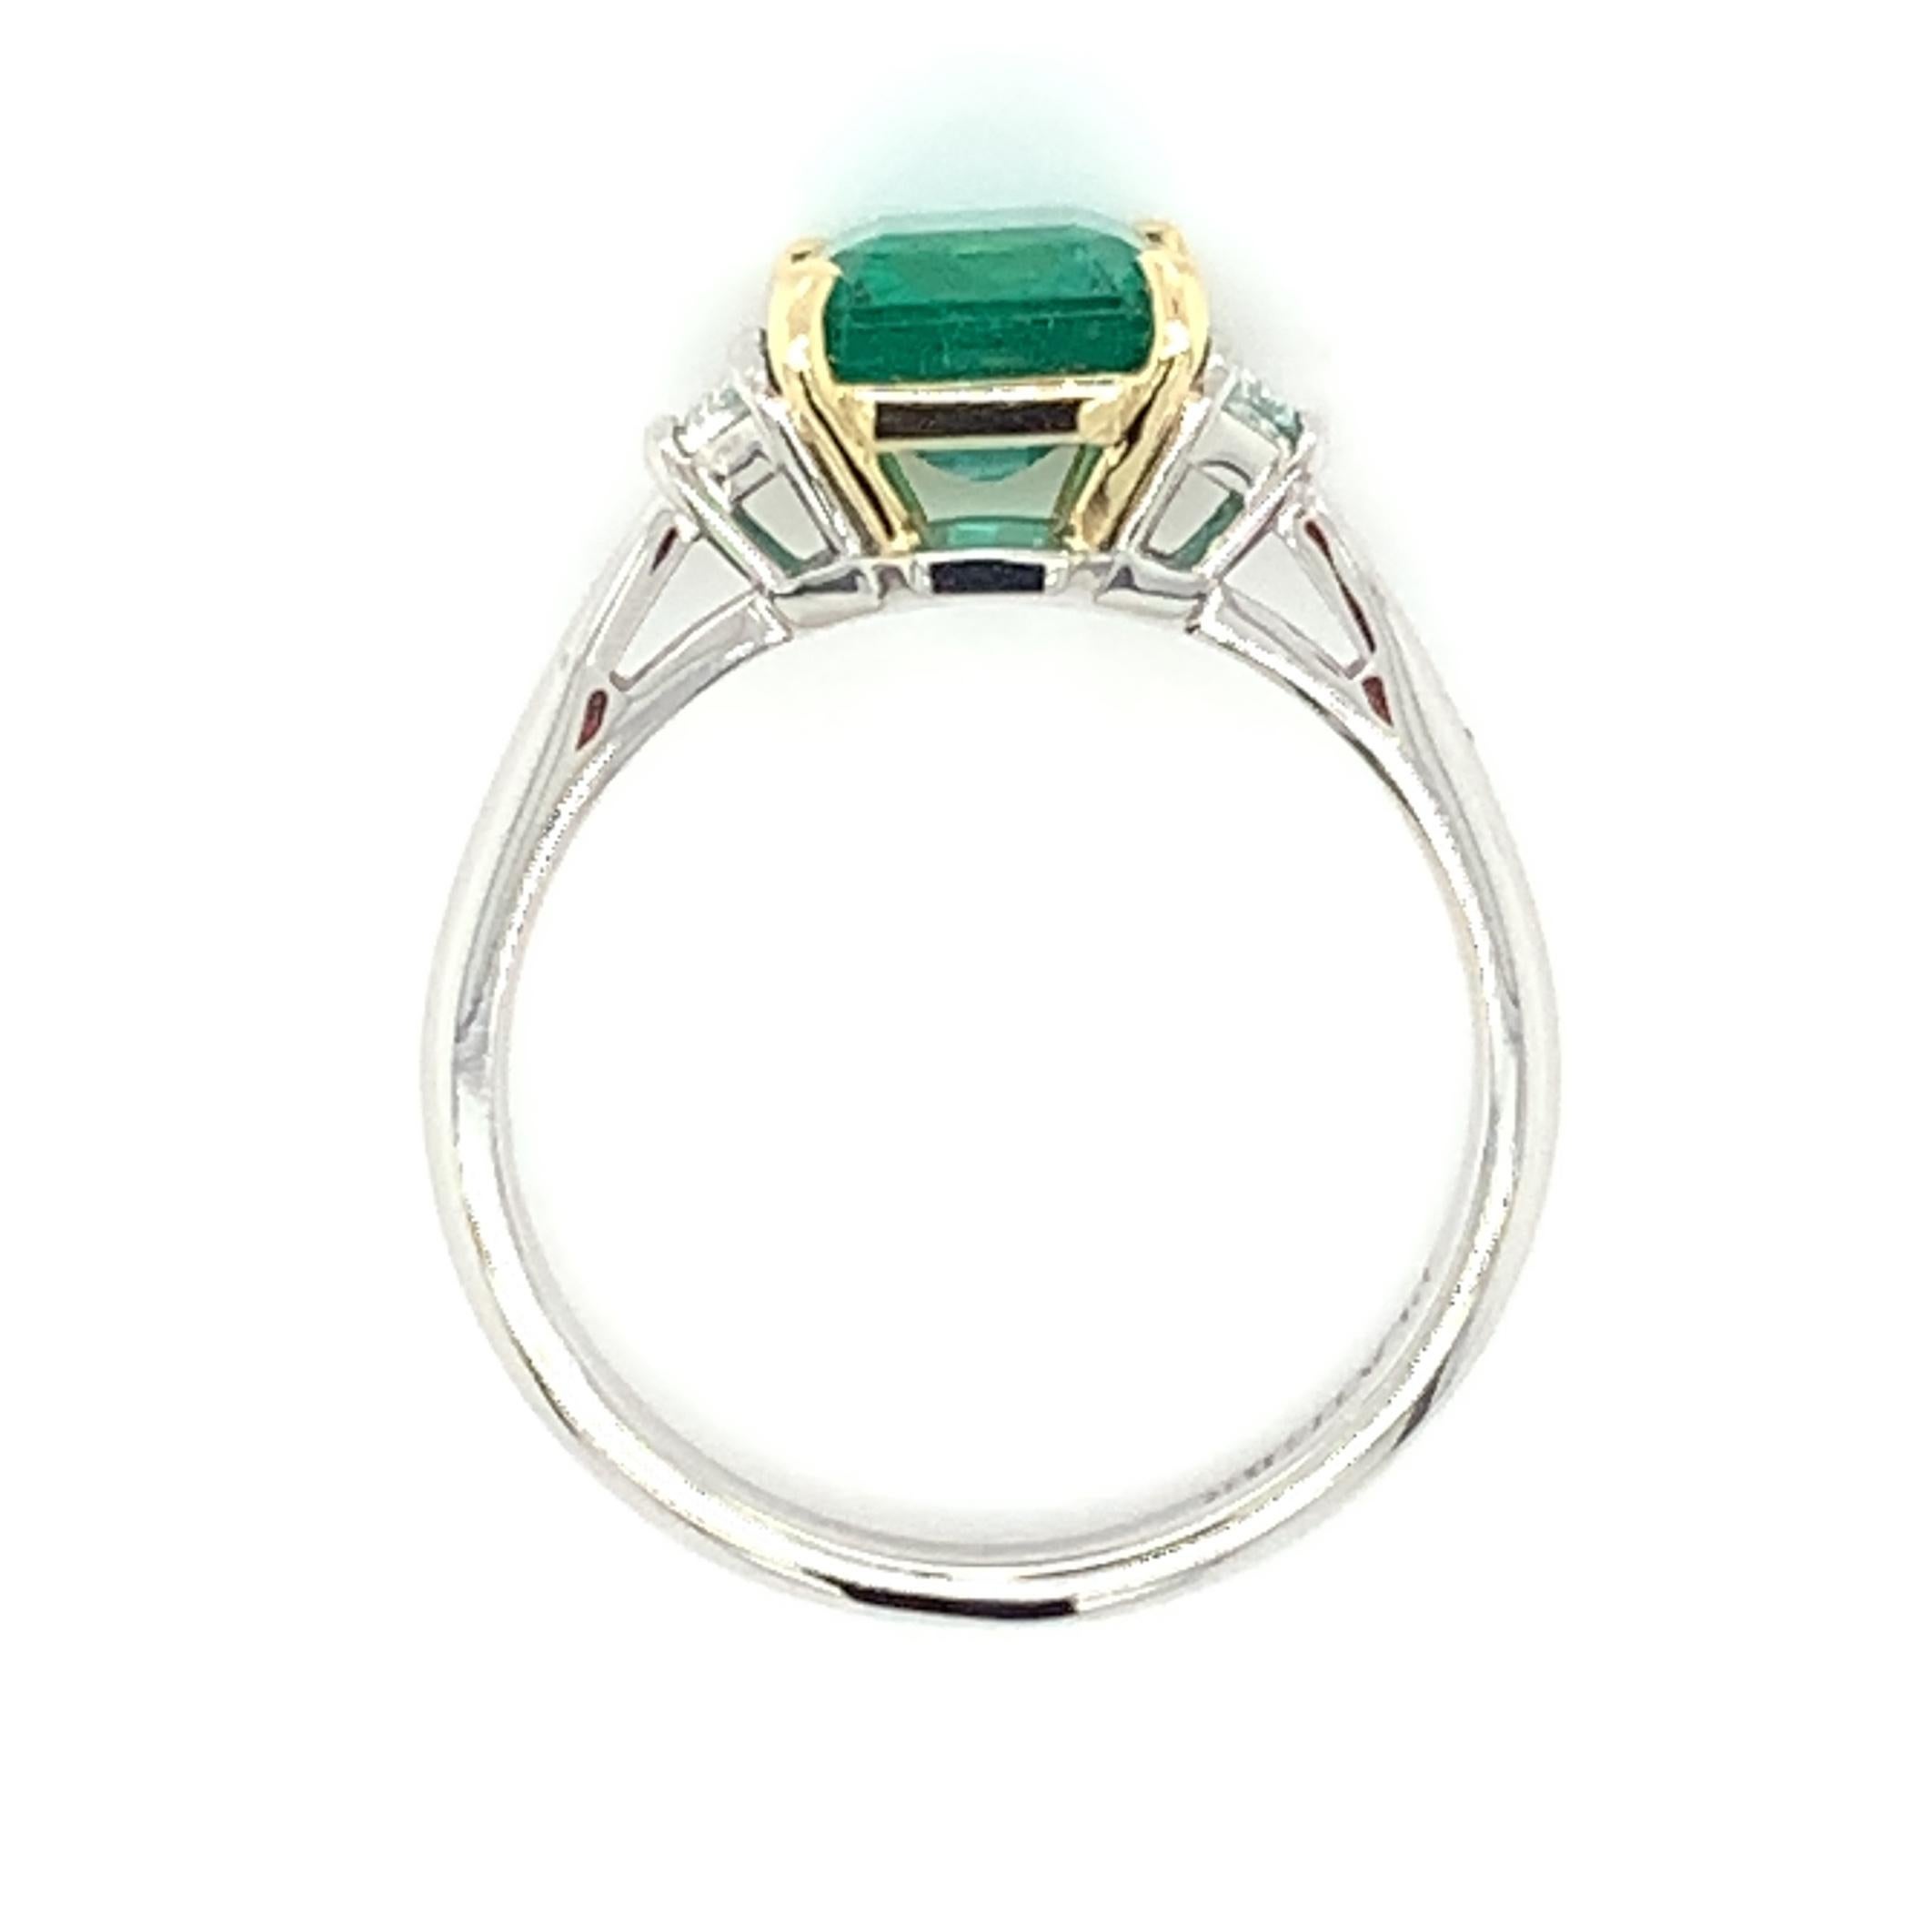 2.25 Carat Emerald and Diamond Engagement Ring in Platinum and Yellow Gold For Sale 1